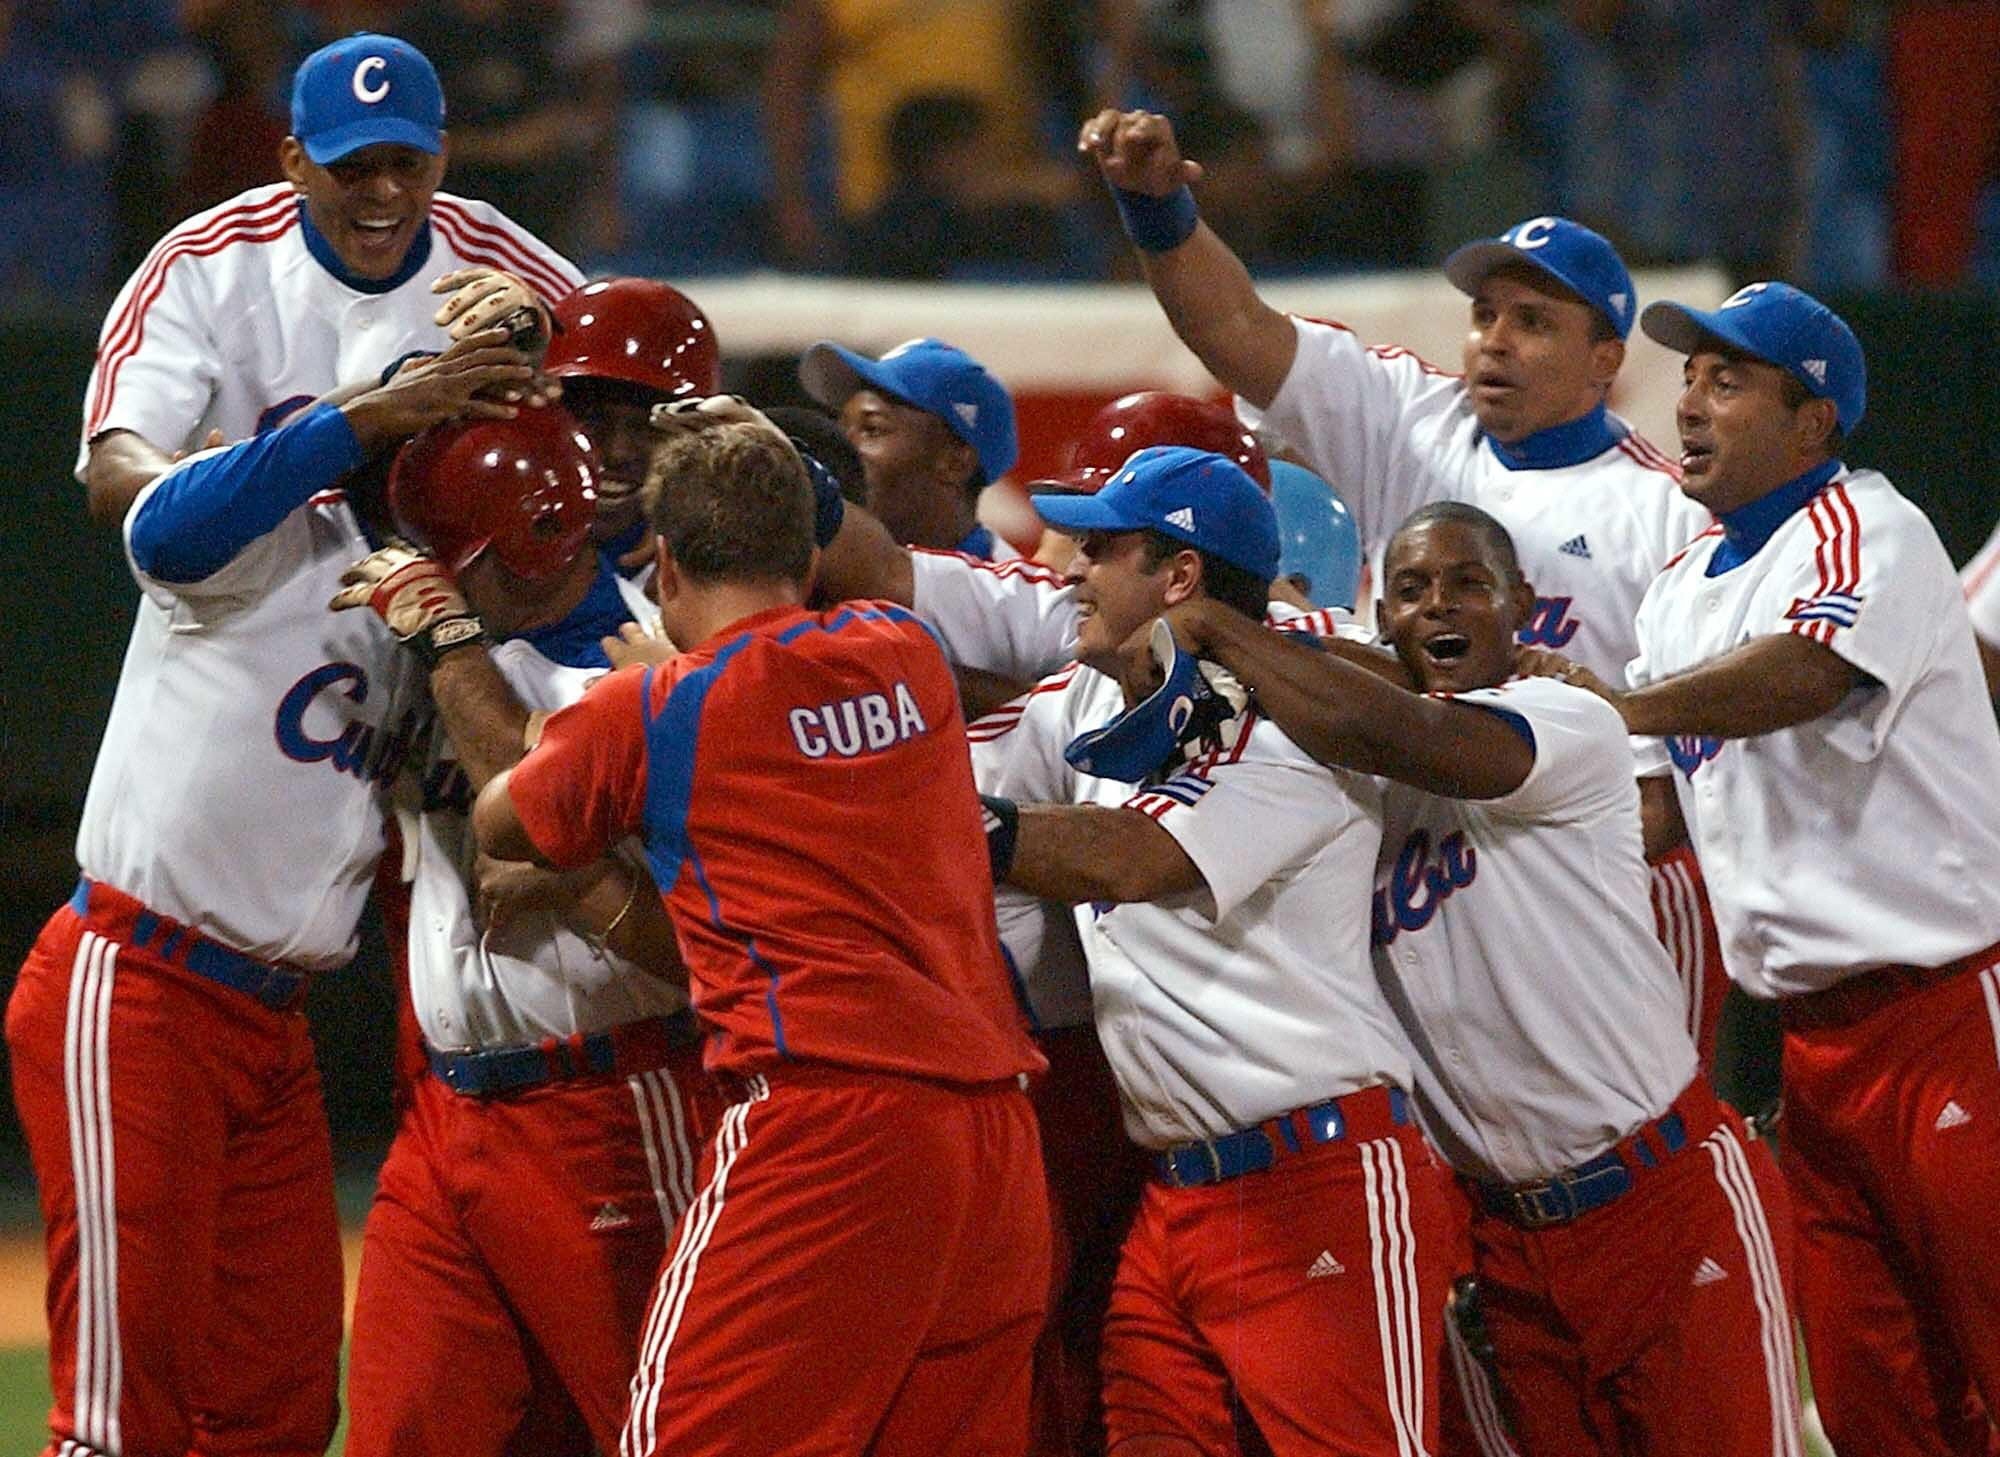 Cuba announces manager for the 5th World Classic and could count on several  Major League Baseball players to bolster the squad - Infobae